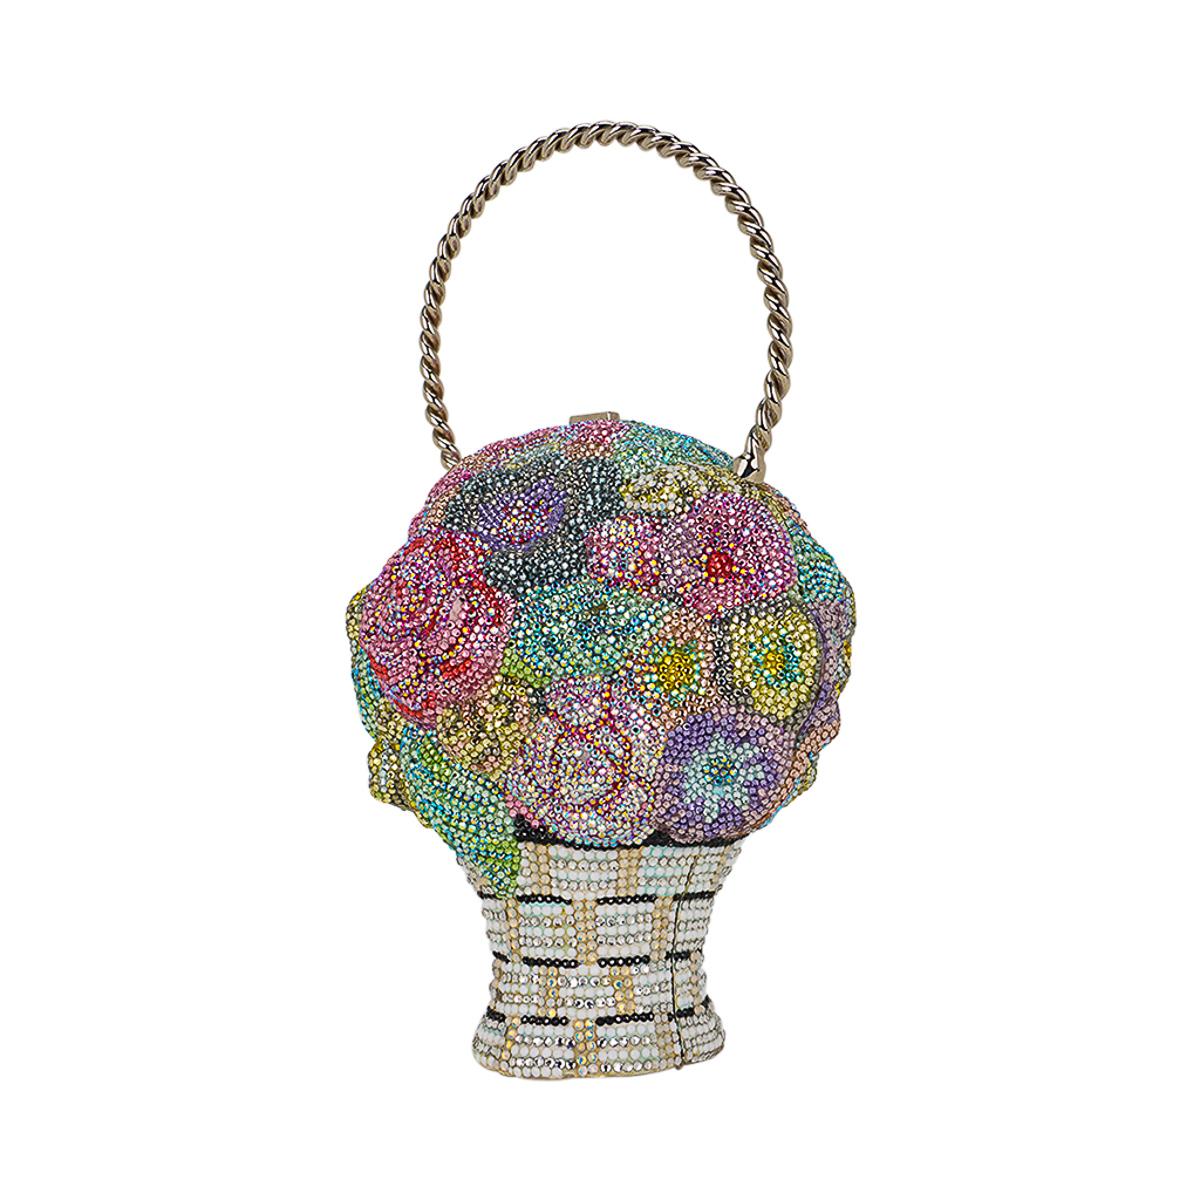 Judith Leiber Flower Bouquet Basket Minaudiere featured in multicolored fine crystal.
Beautifully designed as a flower bouquet, the bag has hand placed crystals in pink, blue, green and white.
Detailed down to the woven pearl lattice effect at the